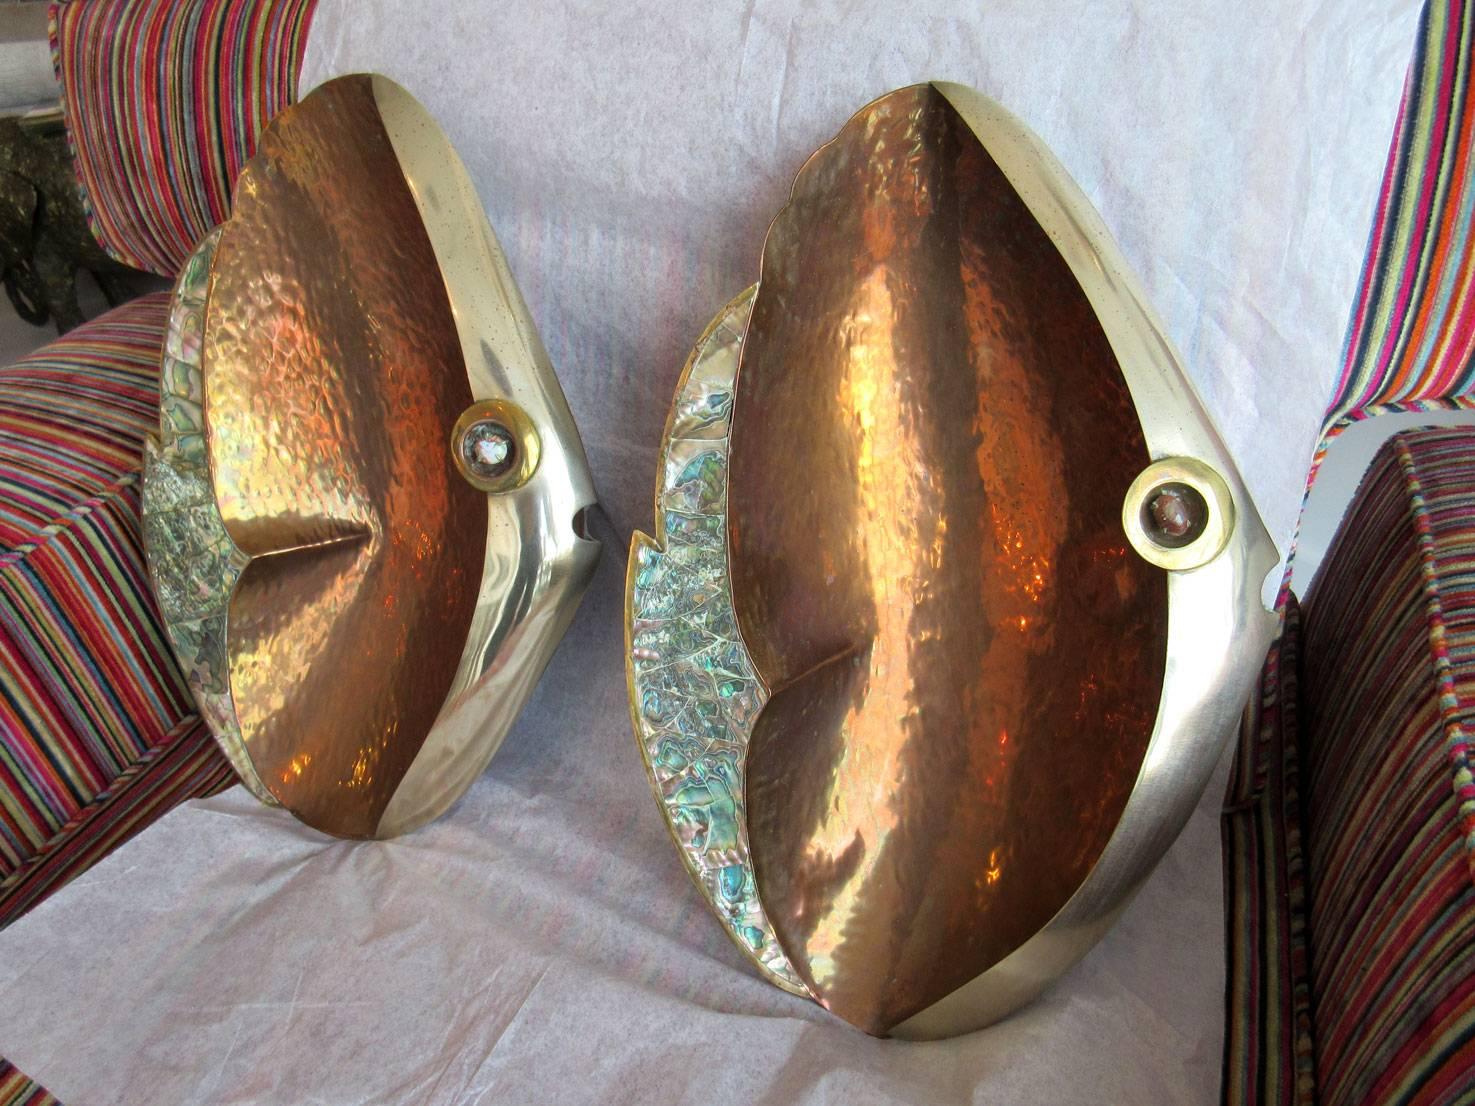 Pair of mixed metal Mexican fish, with abalone inlaid tails and opal stone eyes.
Signed, 